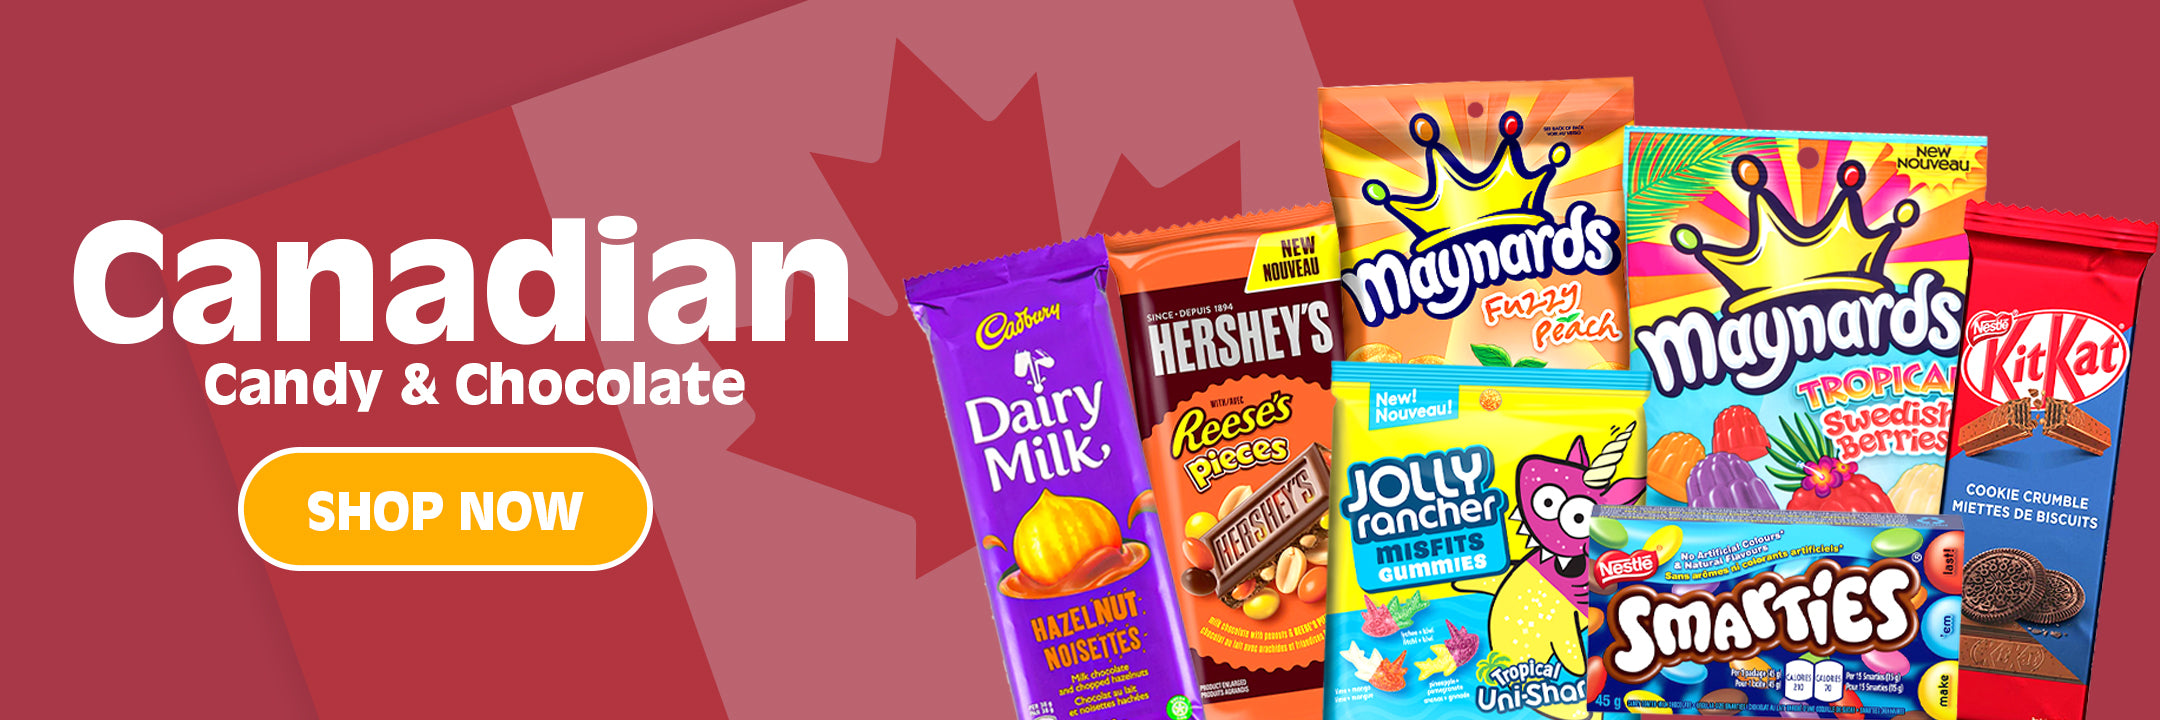 Canadian Candy, Chocolate, and Snacks Desktop